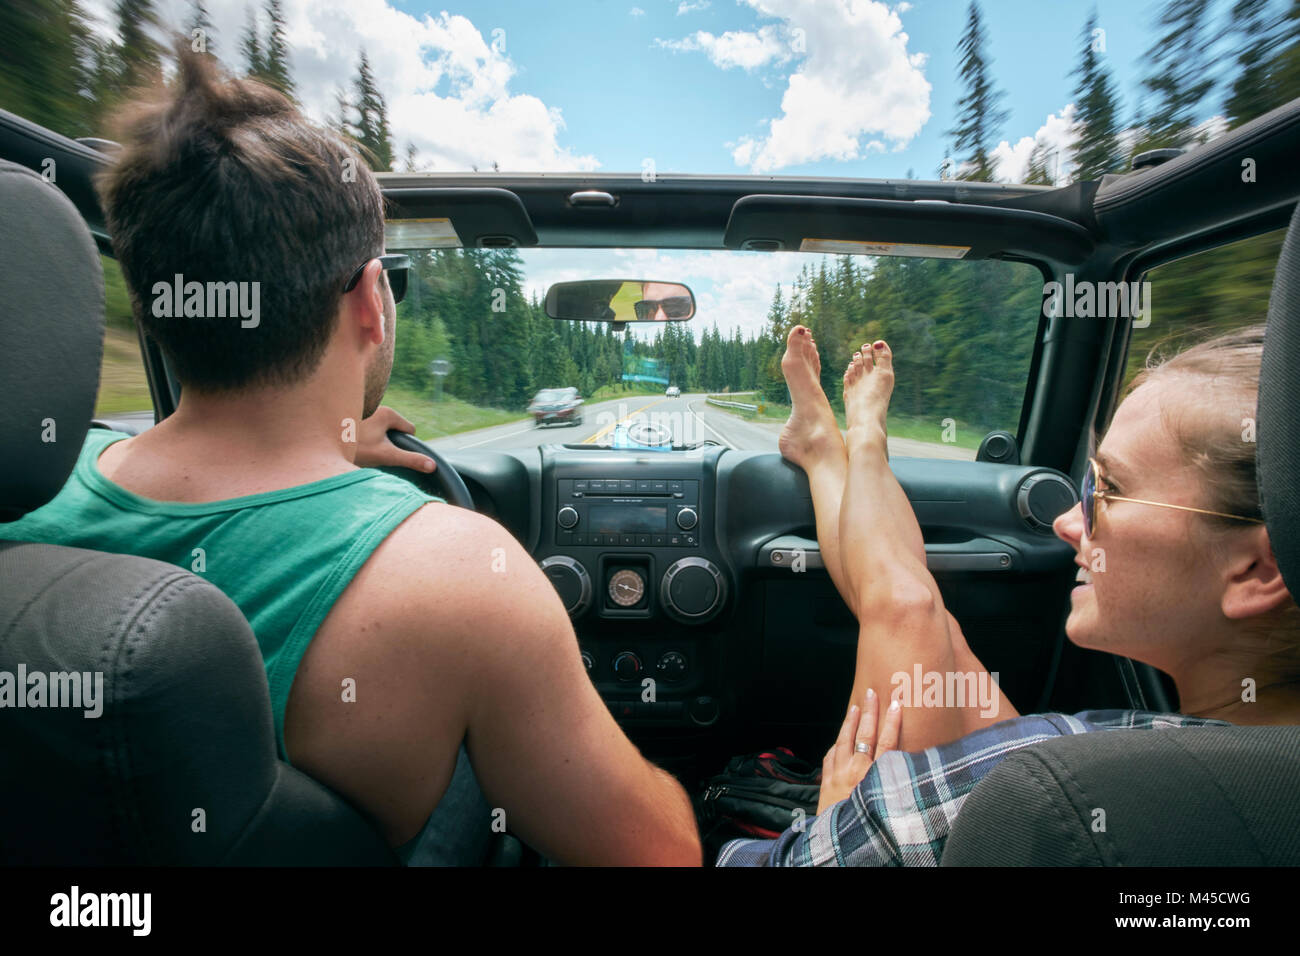 Young woman with feet up driving on road trip with boyfriend, Breckenridge, Colorado, USA Stock Photo